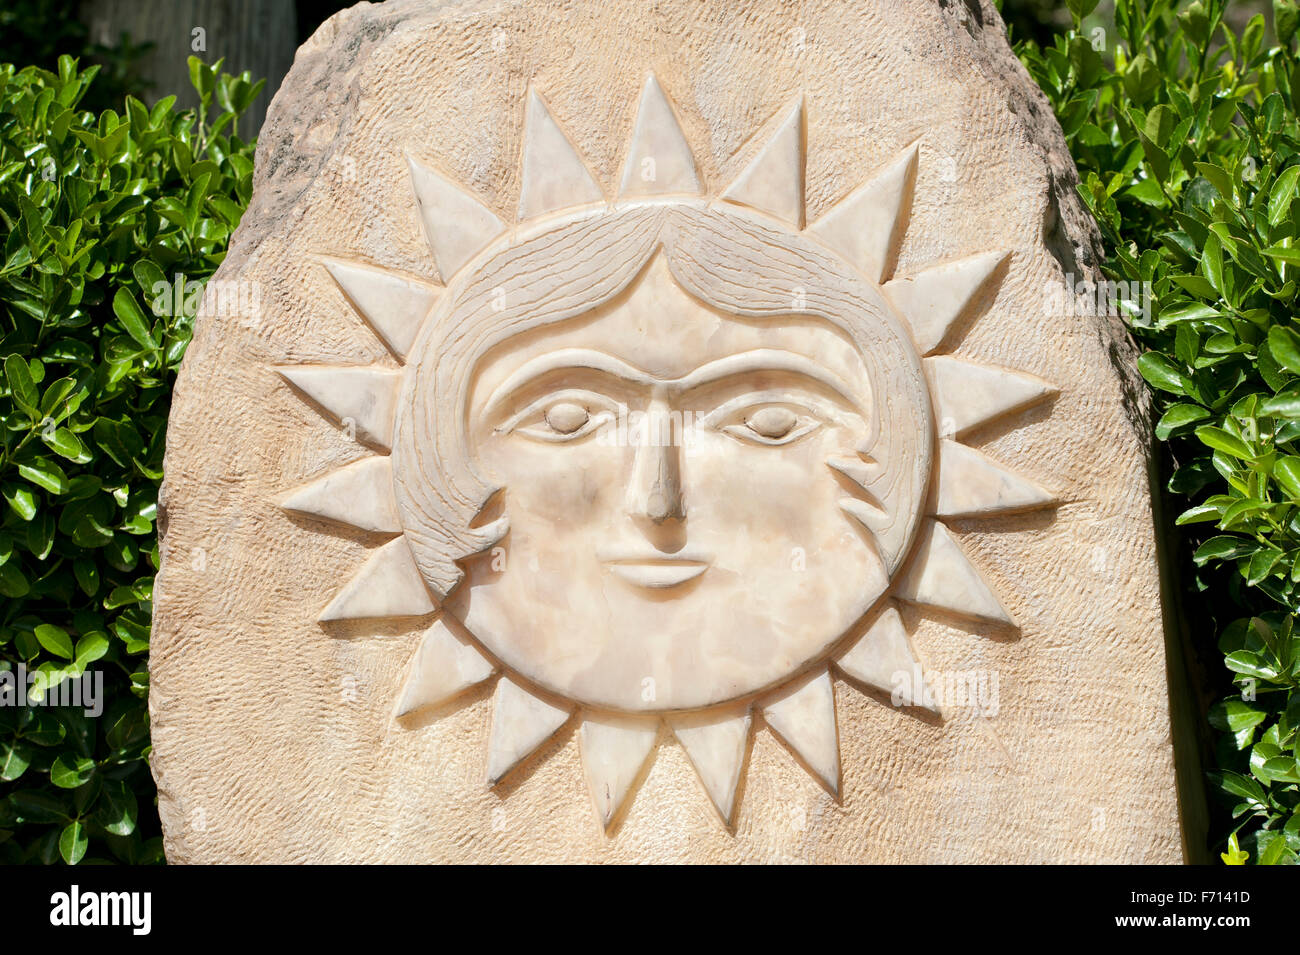 Sun with face carved in stone, Golestan Palace, Tehran, Iran Stock Photo